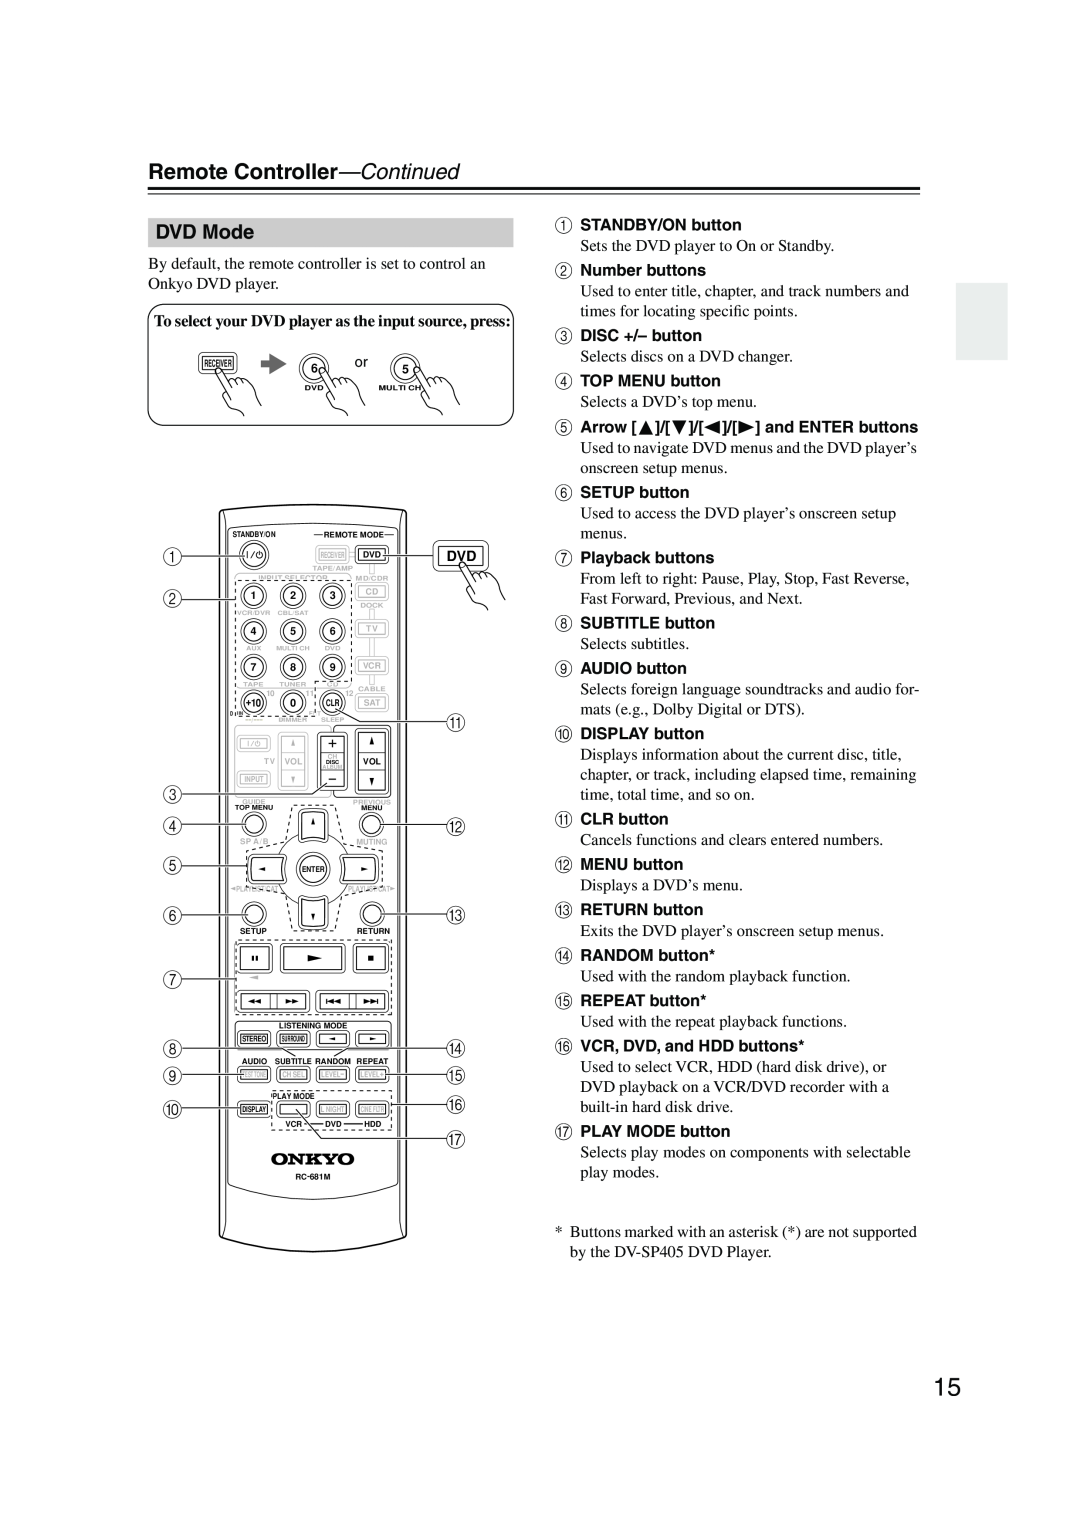 Onkyo HT-SP904 instruction manual DVD Mode, Remote Controller—Continued 